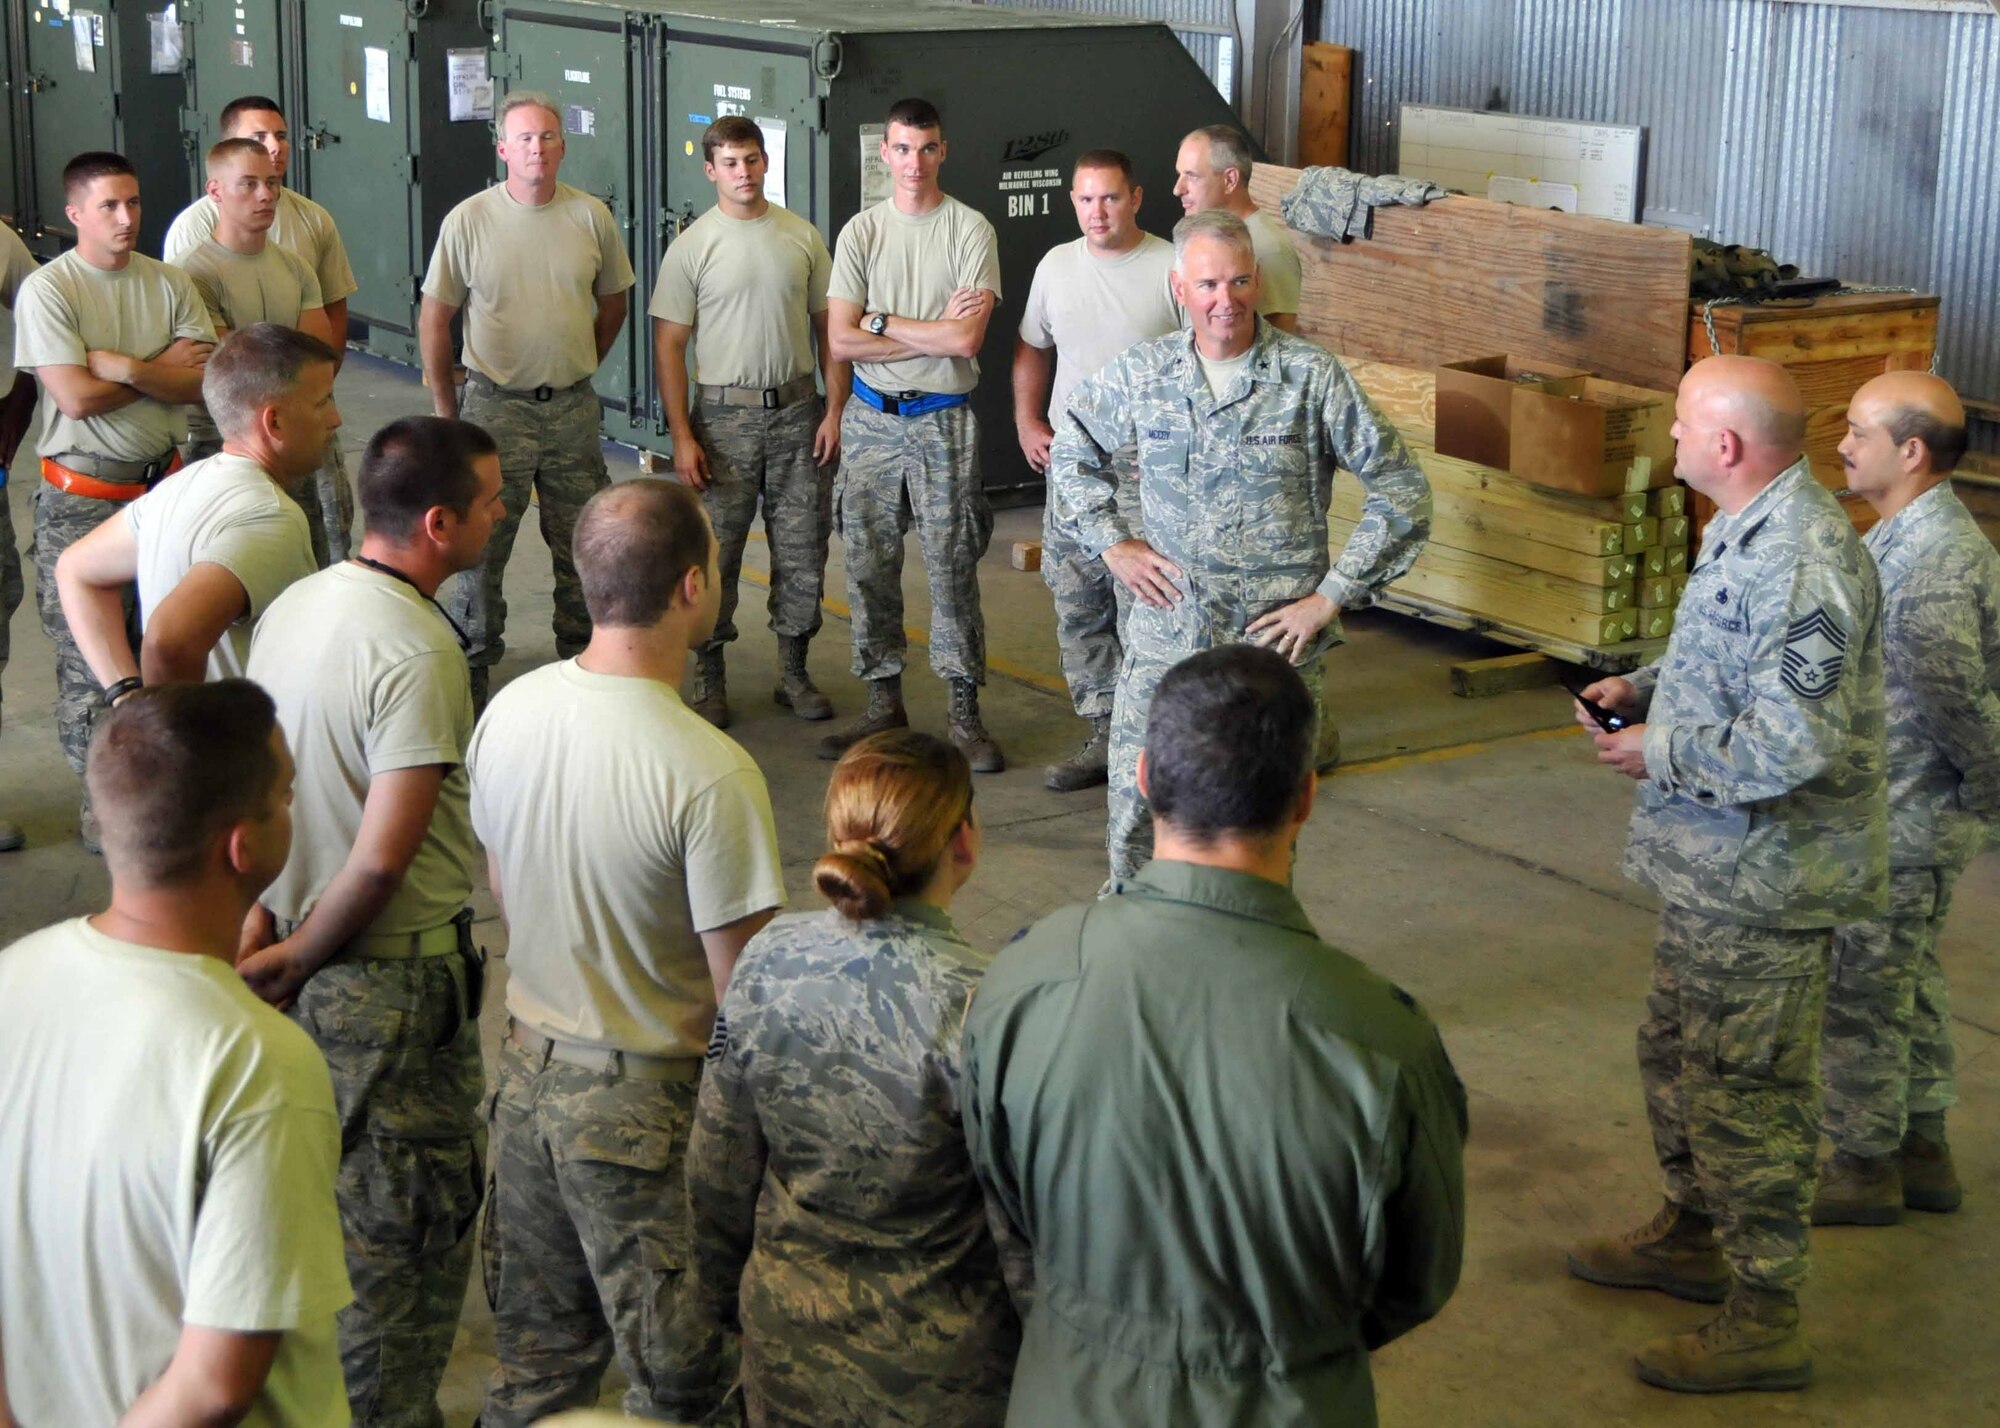 Brig. Gen. John E. McCoy, Assistant Adjutant General for Air, Wisconsin Air National Guard talks with Airmen during a visit to the 313th Air Expeditionary Wing in Western Europe on Saturday, July 30, 2011. (U.S. Air Force photo/Capt. John Capra)